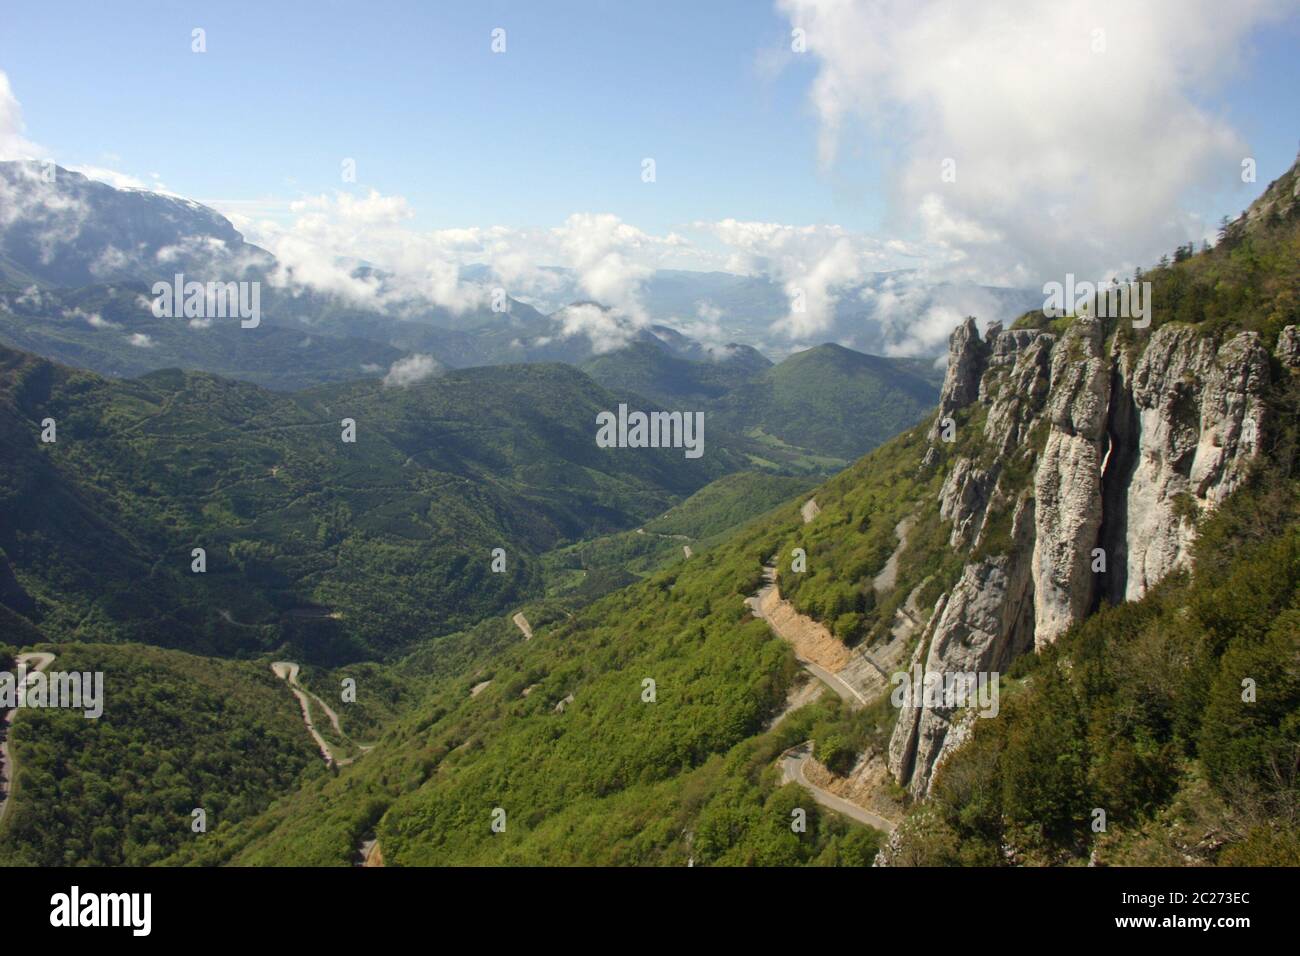 French lower alpine valley with winding roads near the Col de Rousset, part of the Vercors Regional Natural Park in the Drome valley, France.  Backgro Stock Photo